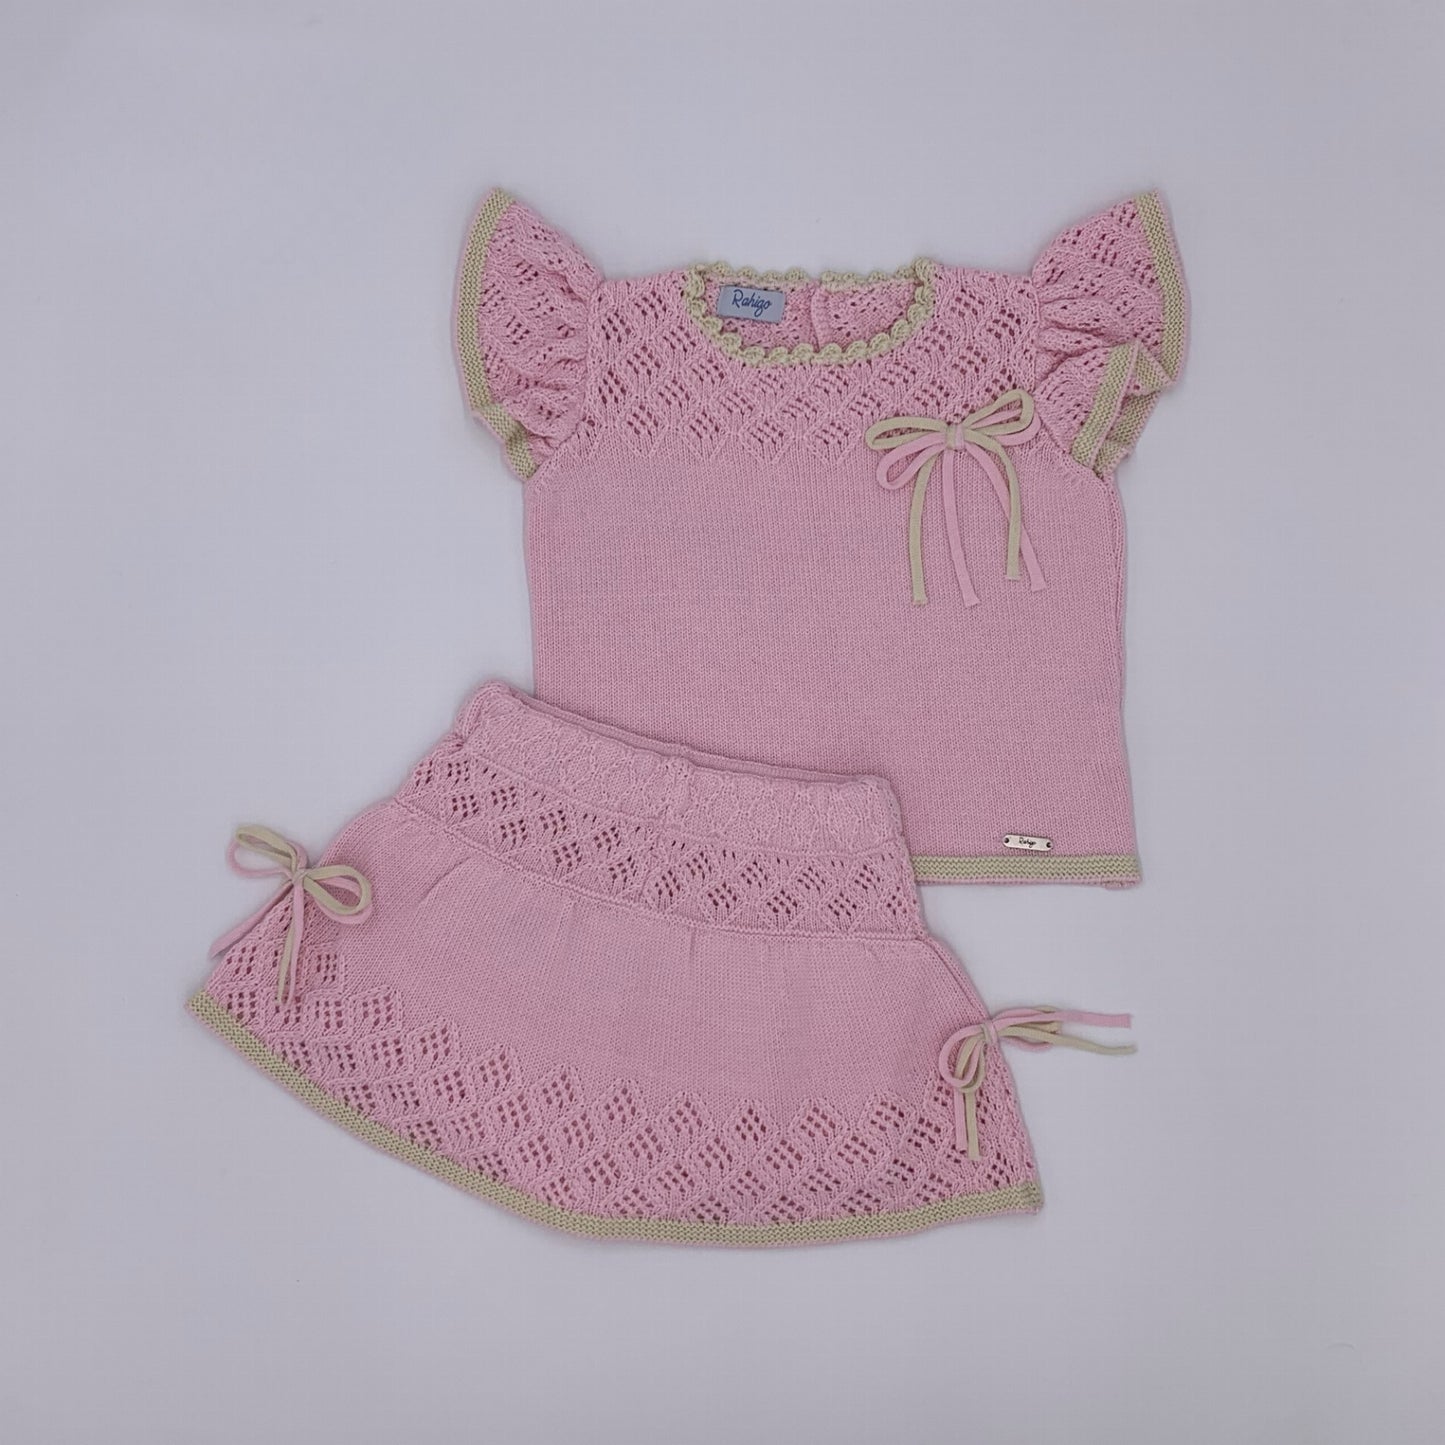 Pink and cream knitted skirt and jumper for girls by Rahigo - Adora